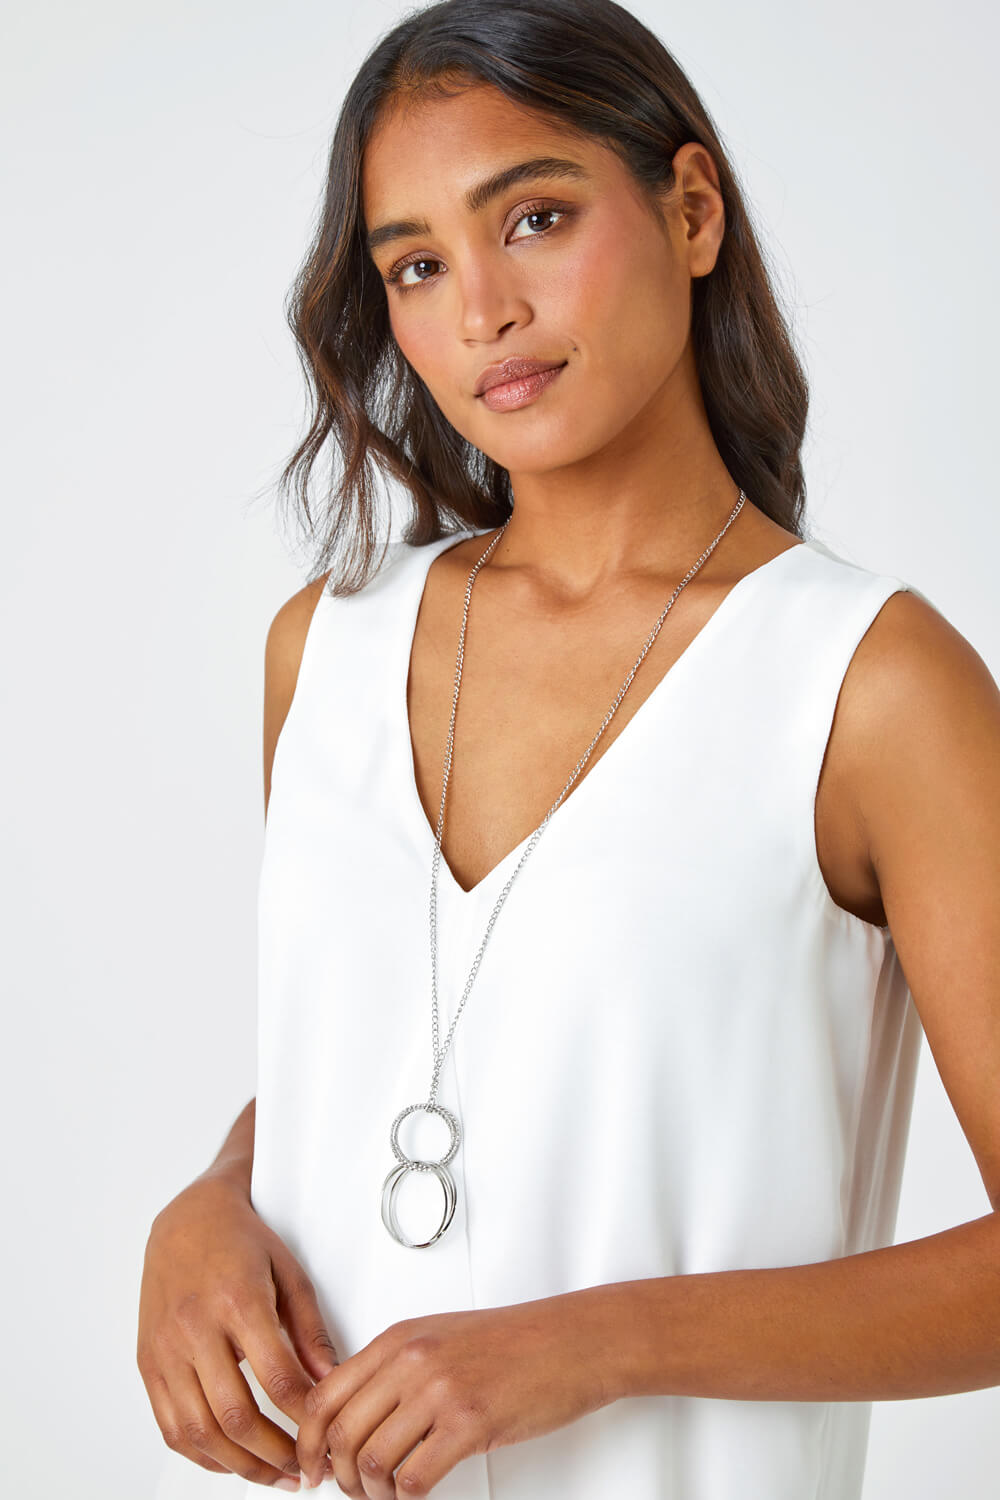 Sleeveless Vest Top with Necklace